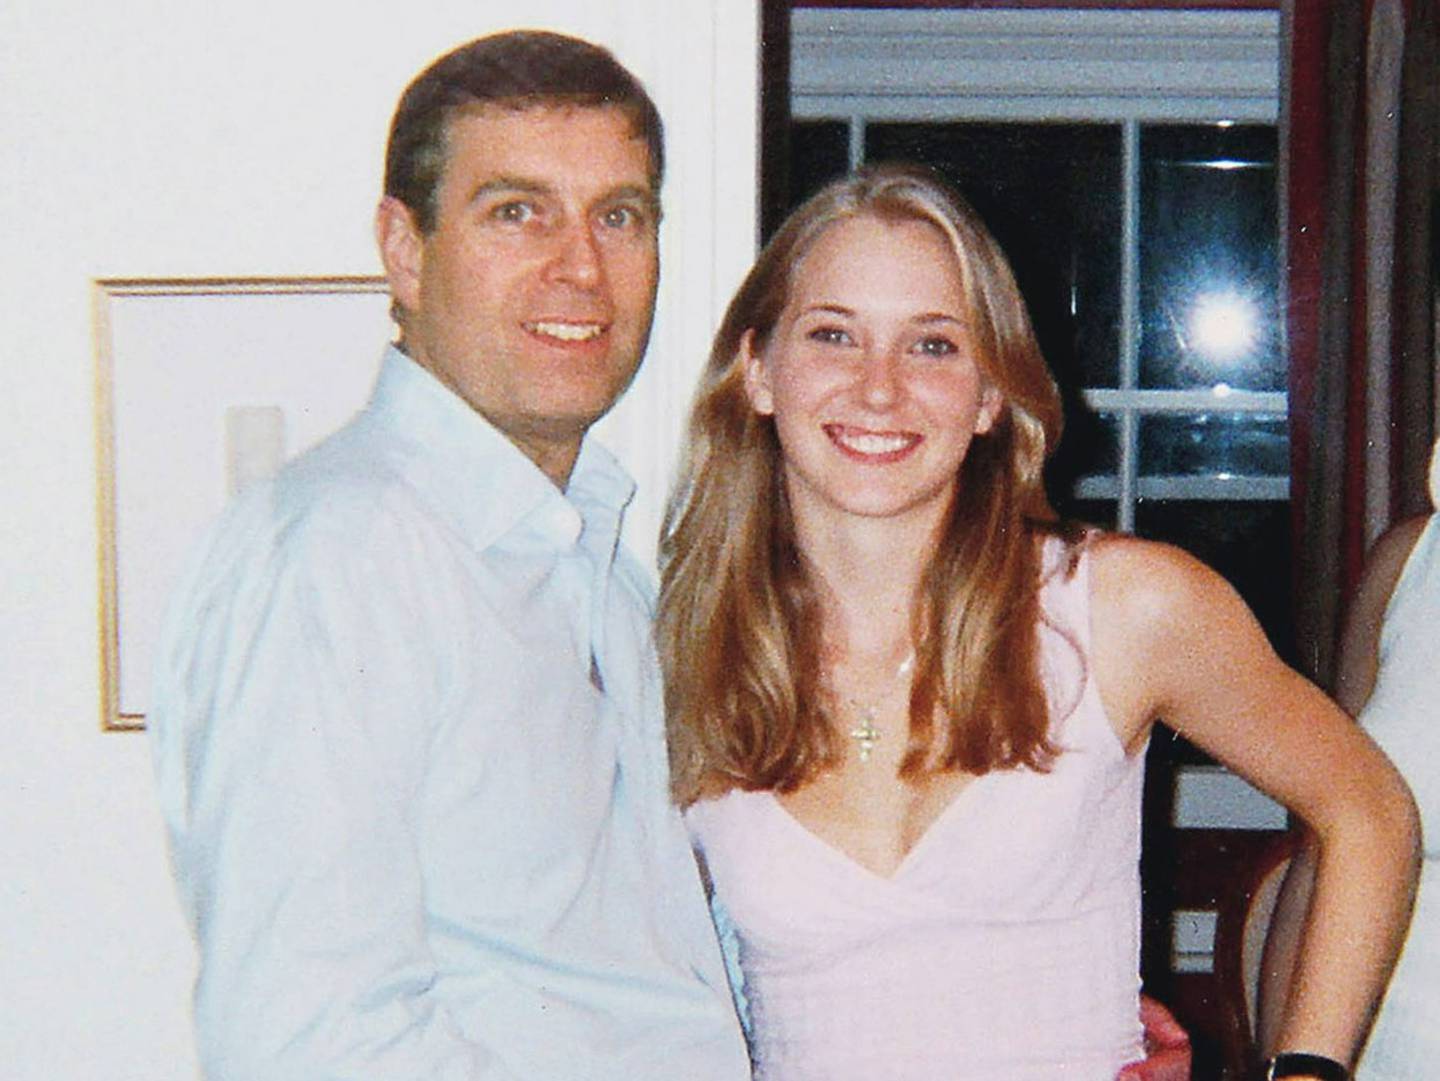 Prince Andrew and Virginia Roberts, now Virginia Giuffre. Photo / supplied